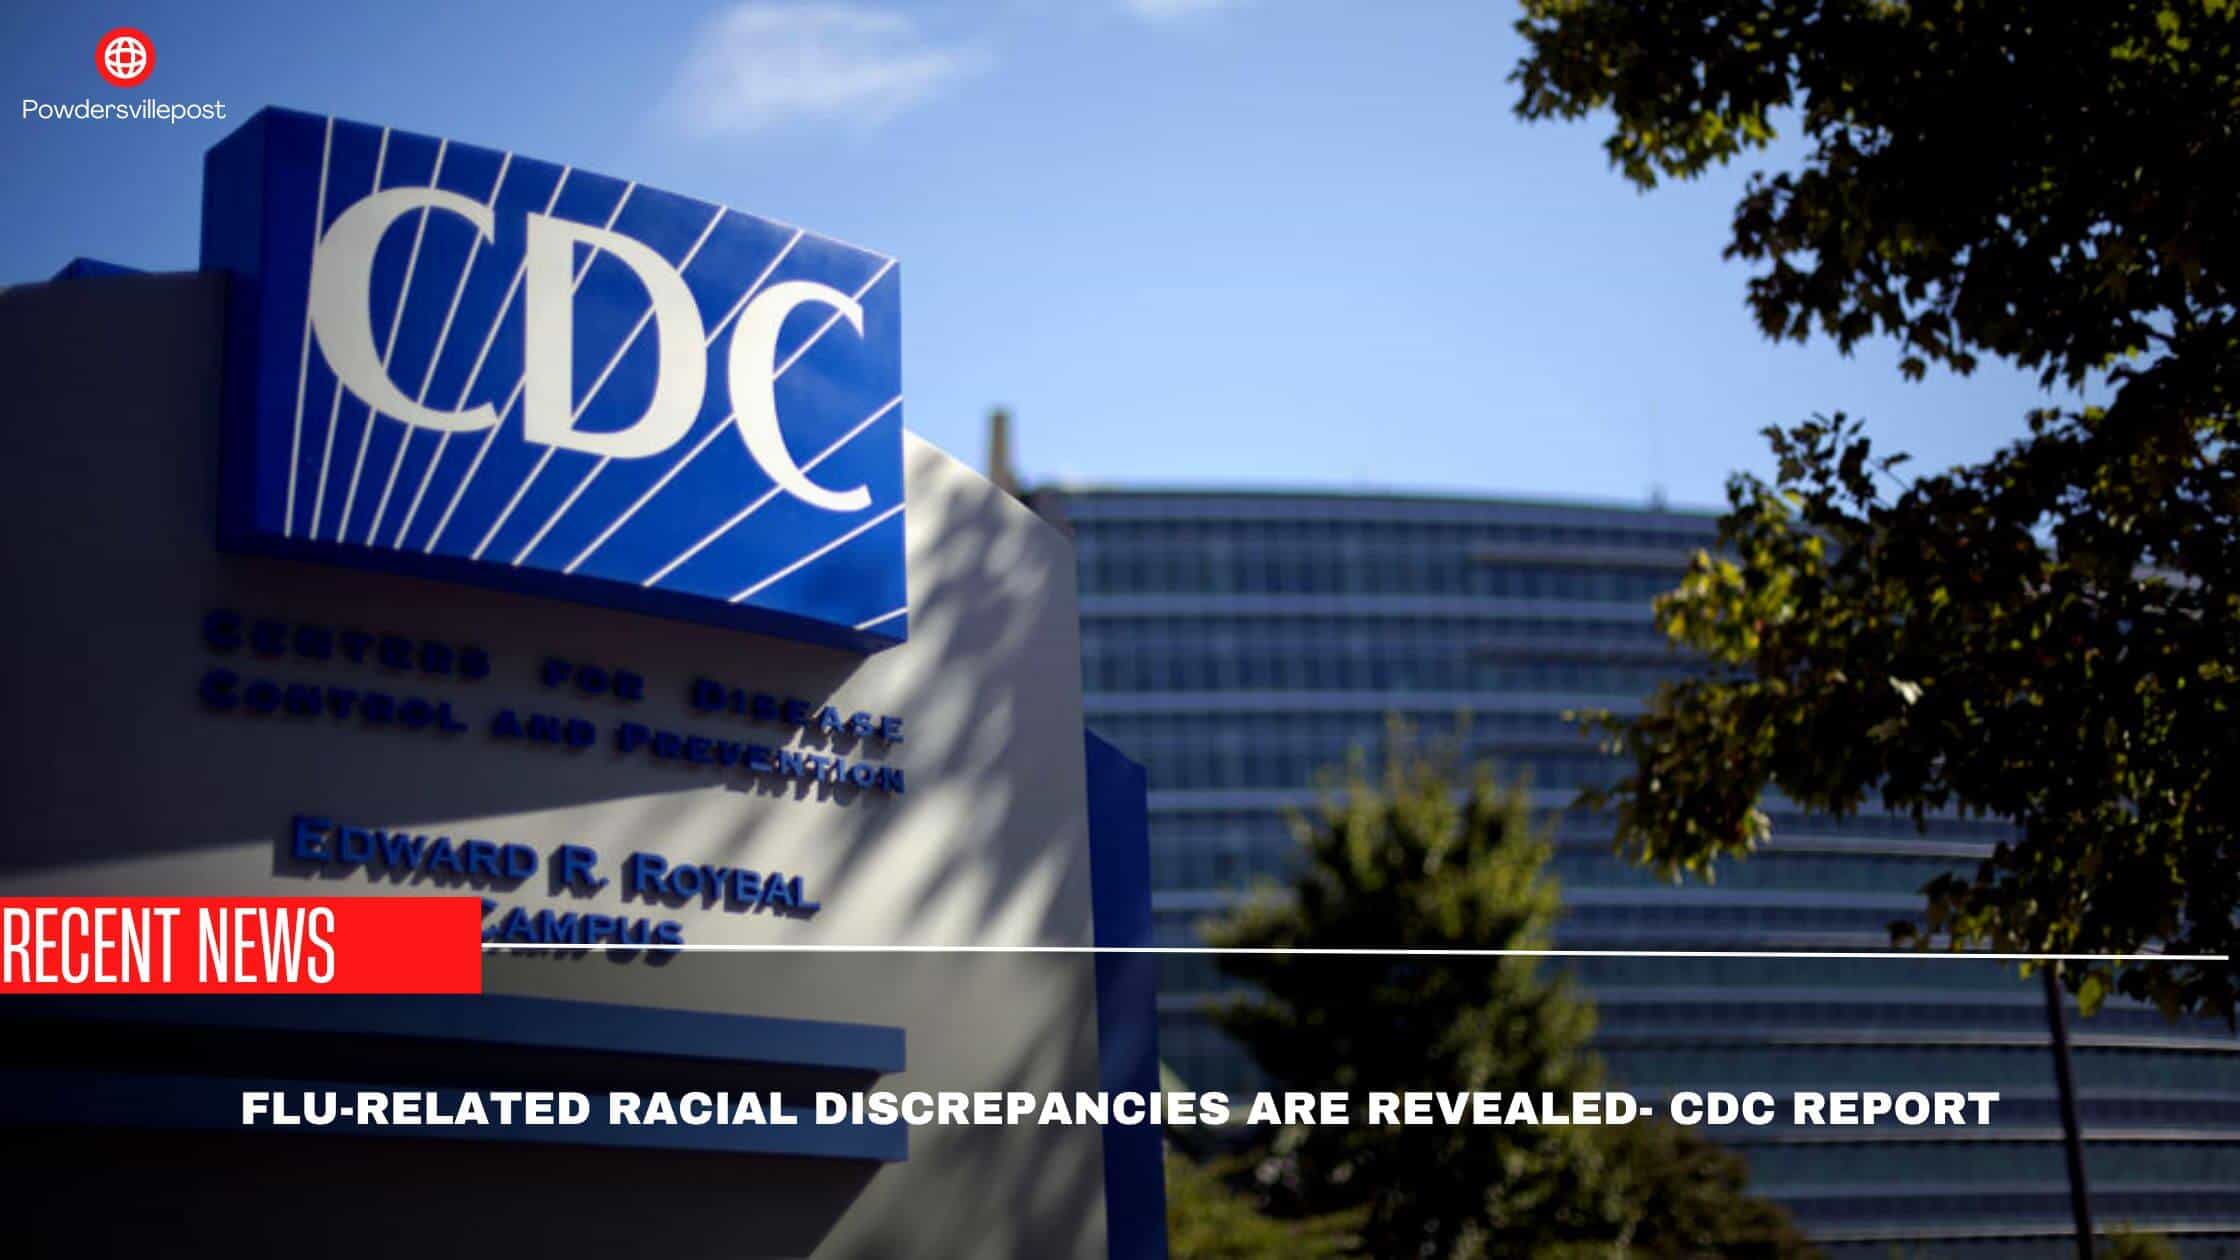 Flu-Related Racial Discrepancies Are Revealed- CDC Report